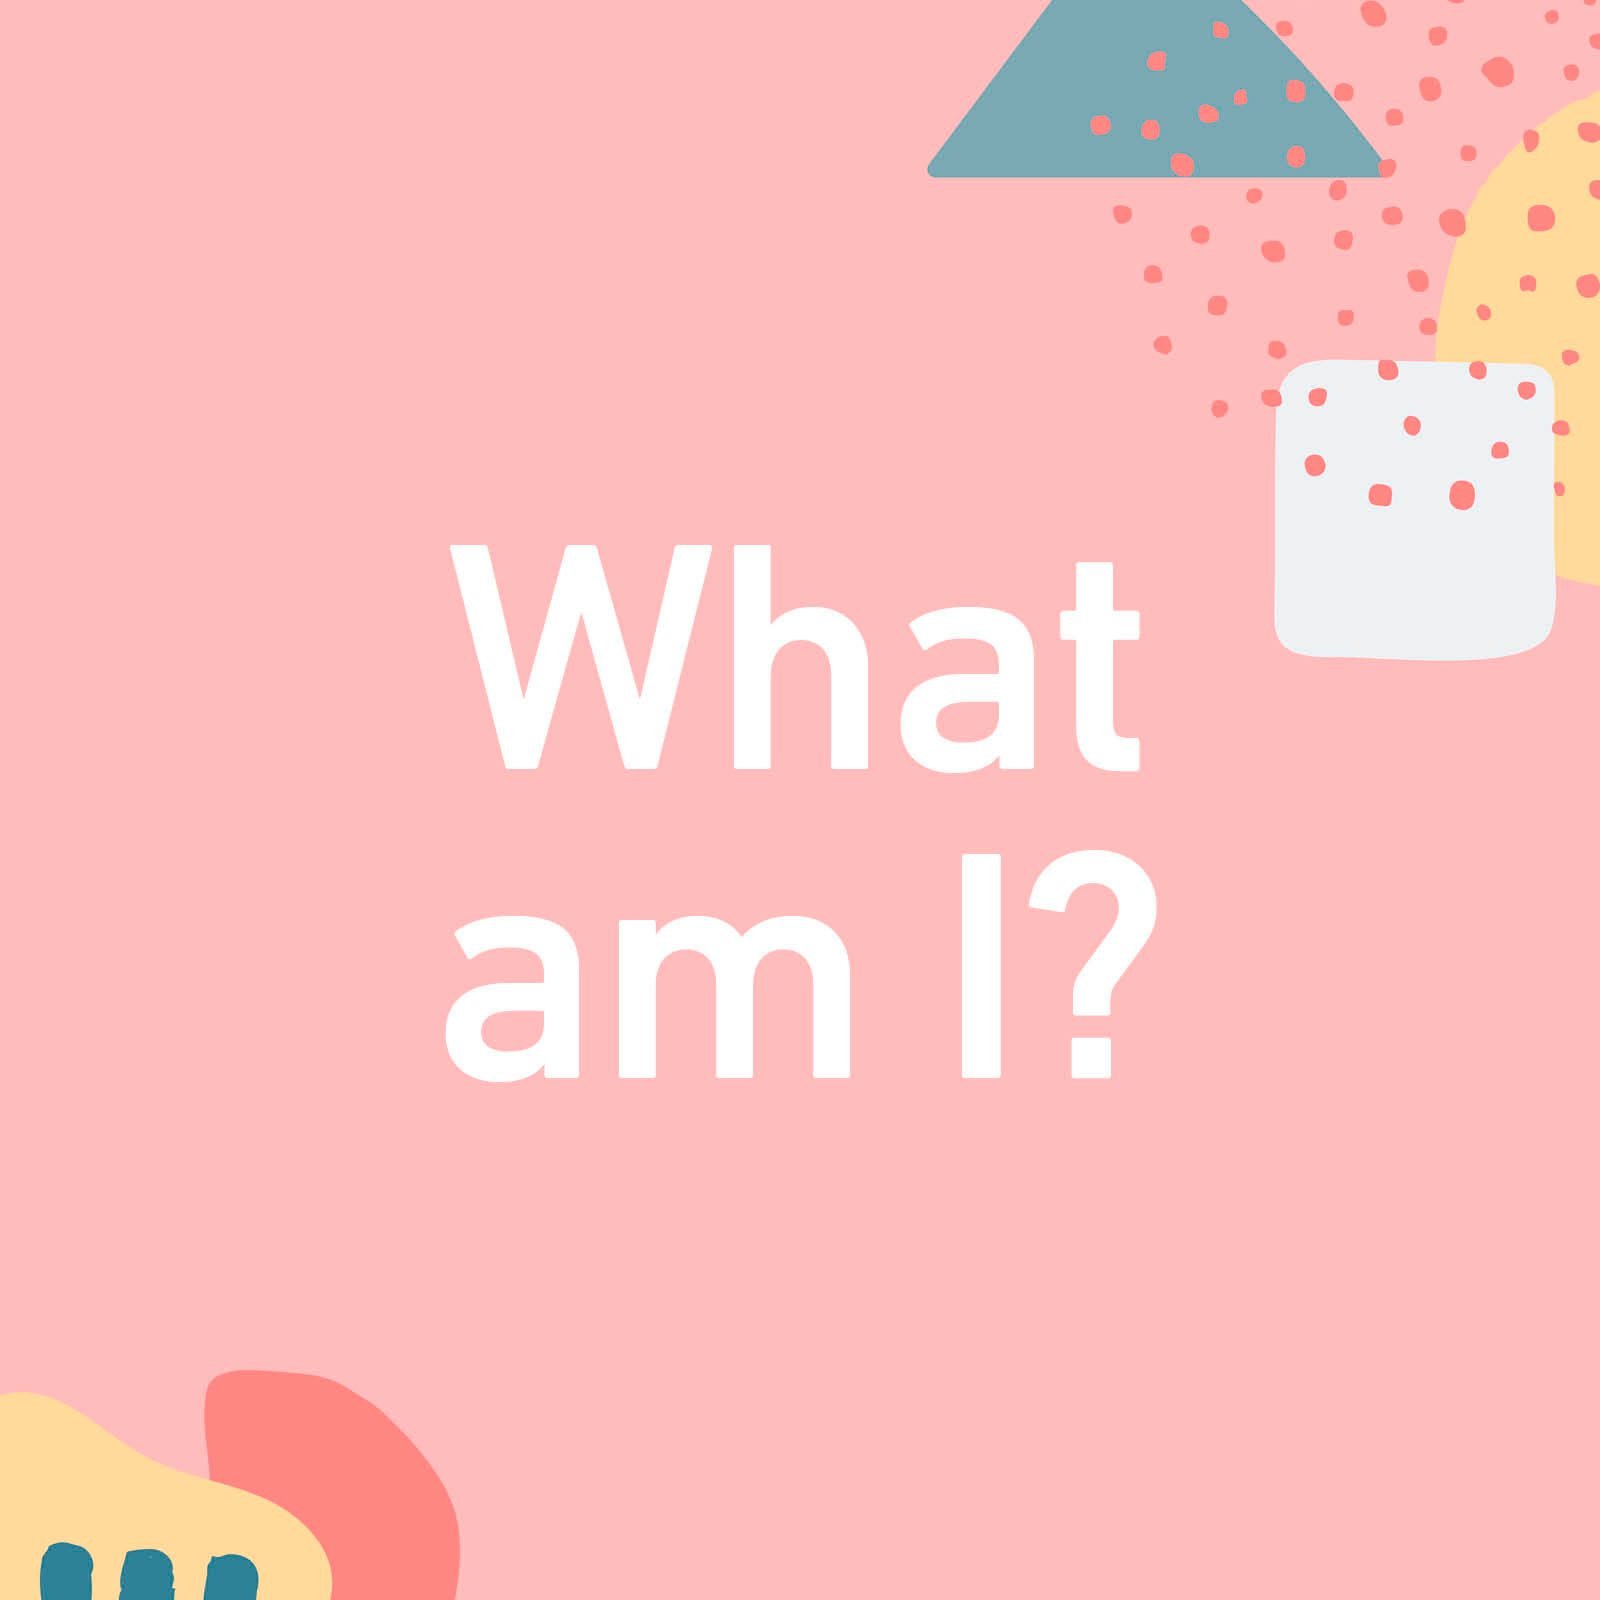 "What am I?" riddles